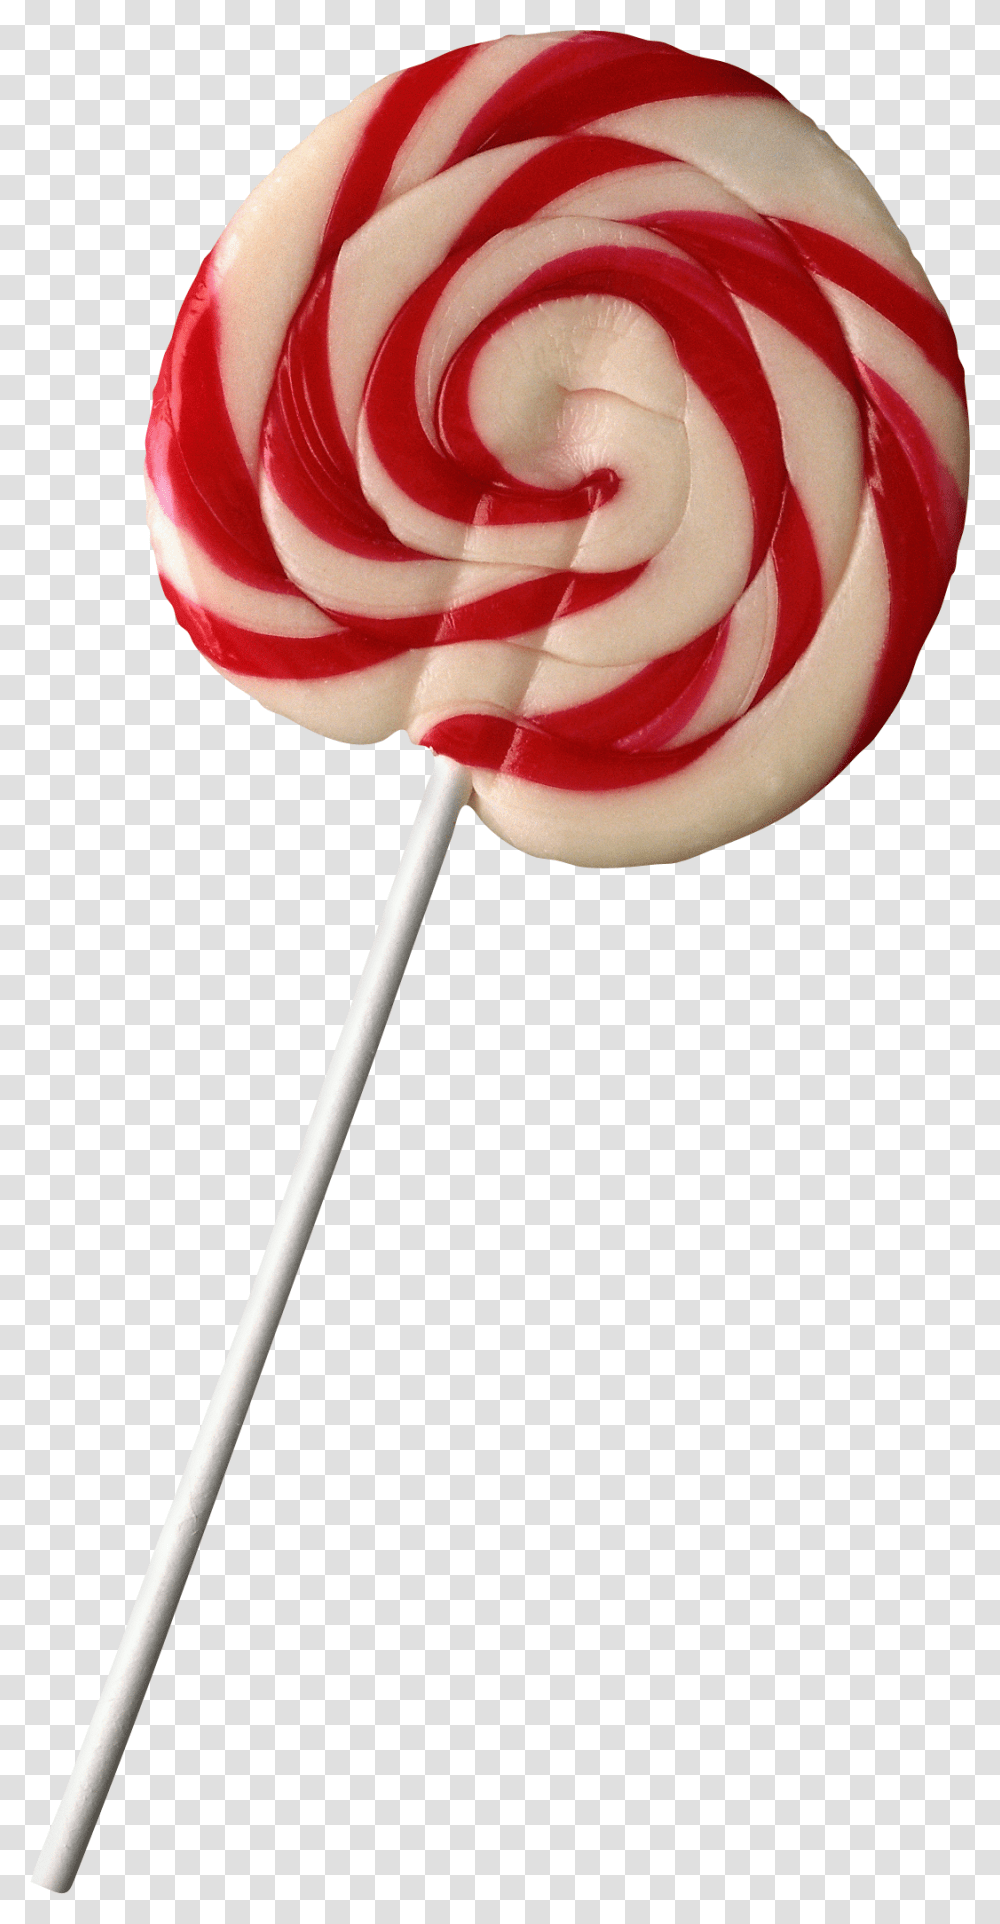 Lollipop, Food, Sweets, Confectionery, Candy Transparent Png